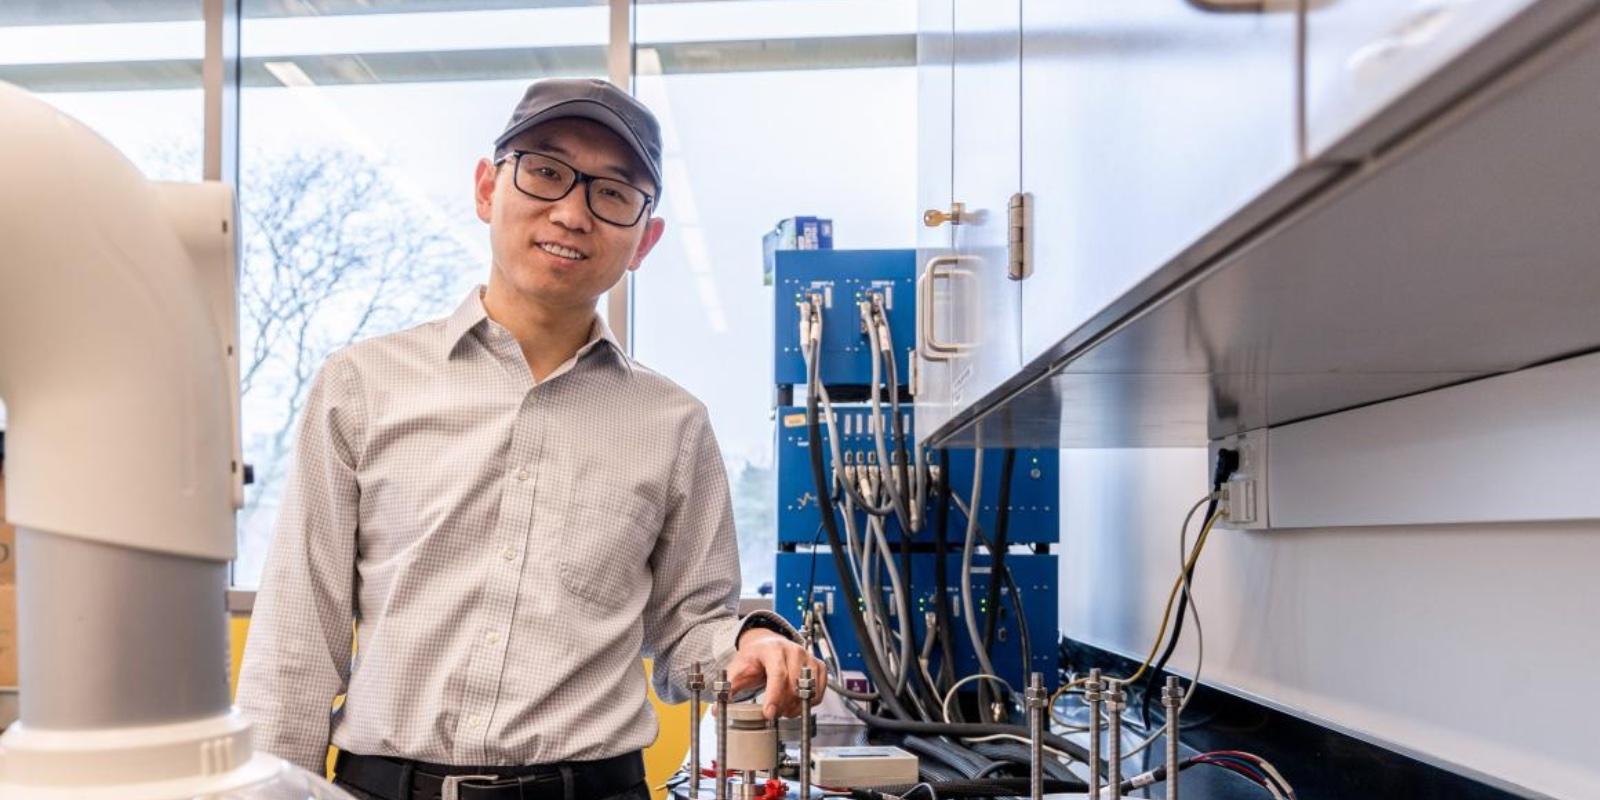 Surrounded by lab equipment, Associate Professor Xuan Zhou poses for a portrait in his UM-Dearborn battery lab